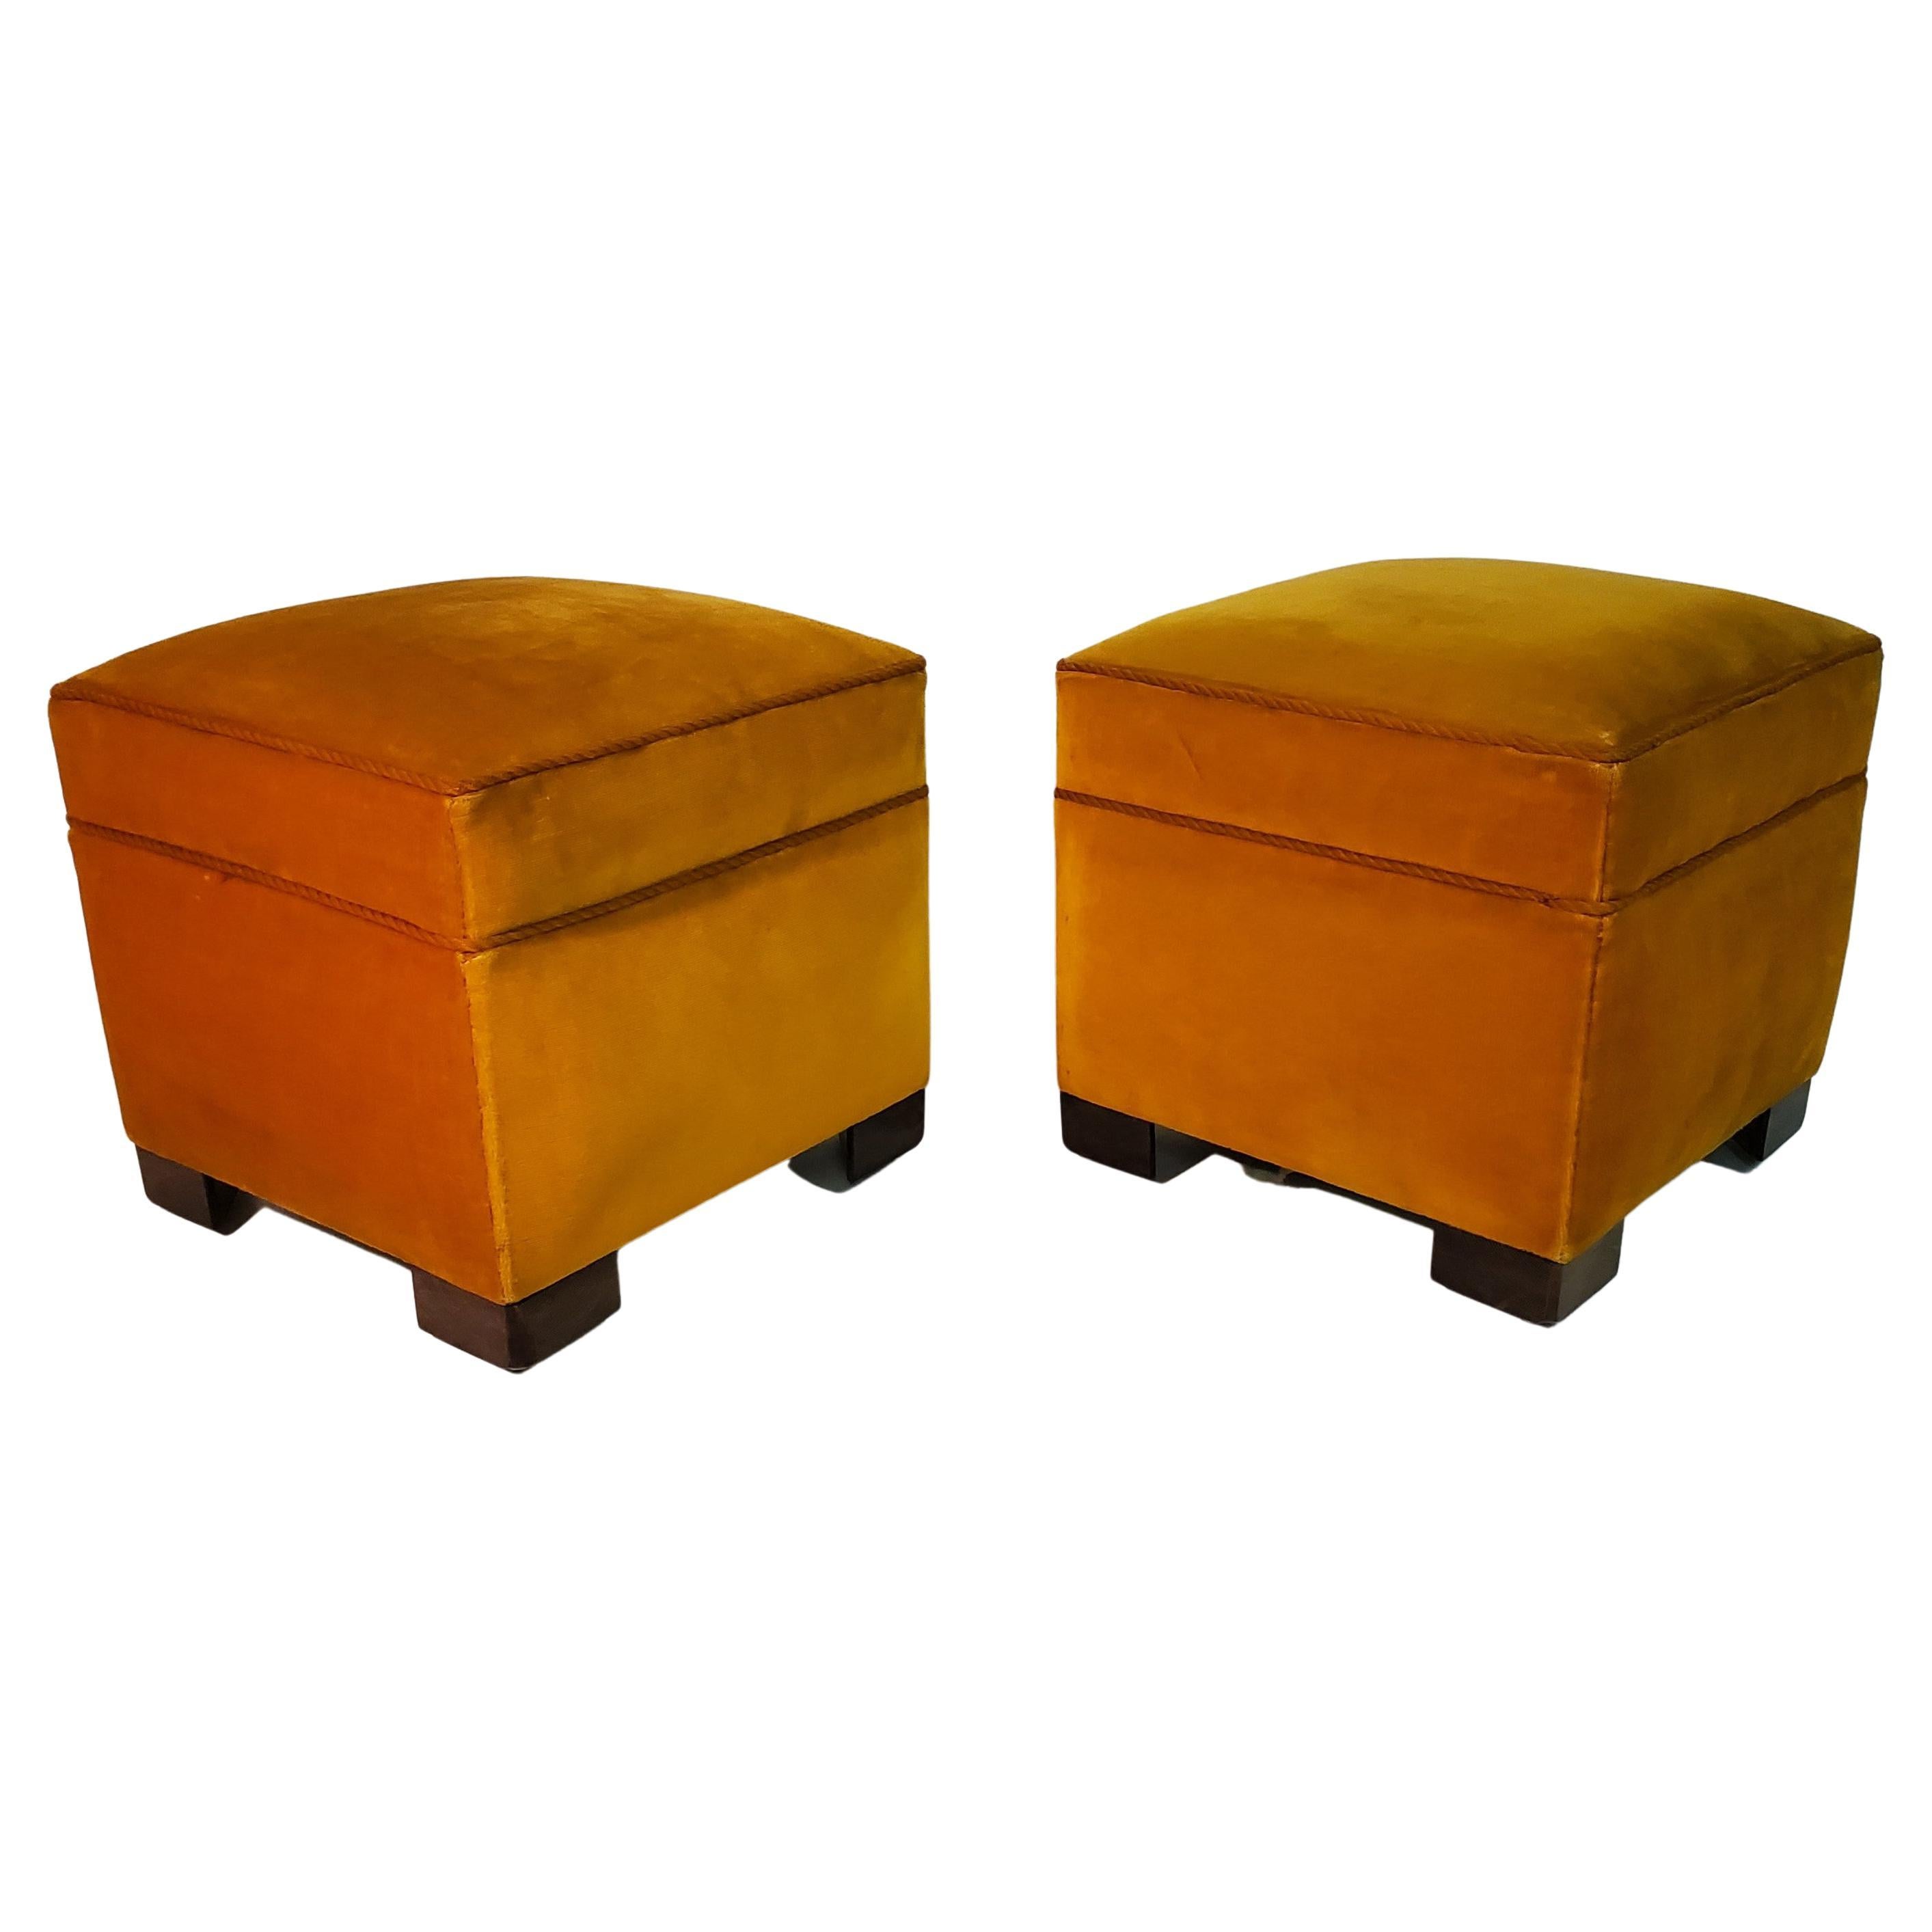 A pair of vintage square yellow upholstered ottomans with cubist wood feet.
 The poufs are covered in the original bright yellow velvet fabric that adds a pop of color to the space. They have a square shape, which gives them a modern and geometric